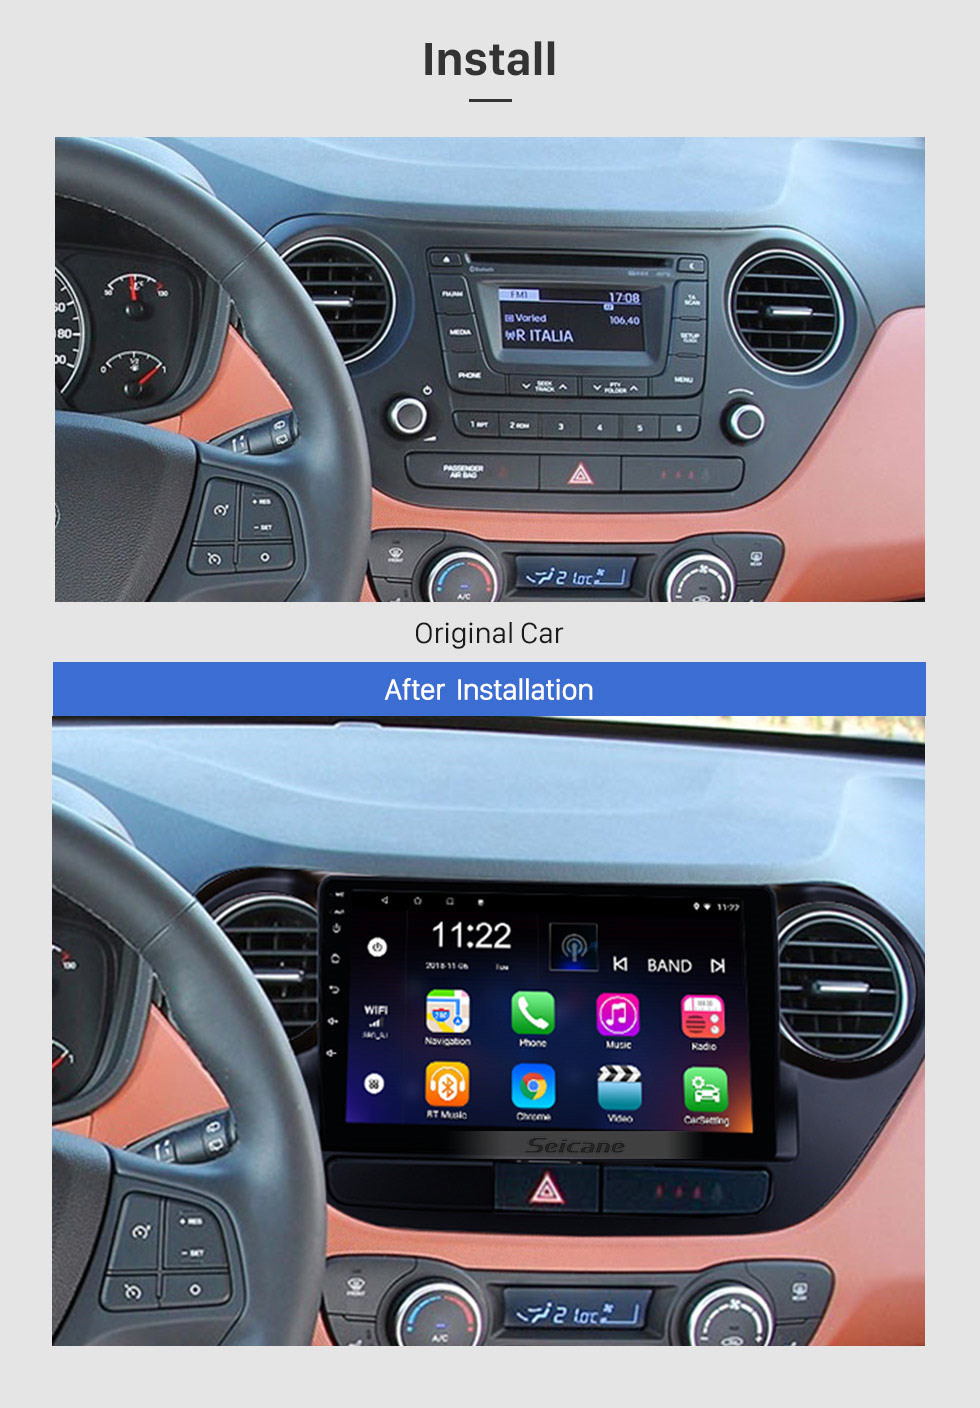 Seicane Hot Selling Android 10.0 2013-2016 HYUNDAI I10 LHD GPS Navigation Car Audio System Touch Screen AM FM Radio Bluetooth Music 3G WiFi OBD2 Mirror Link AUX Backup Camera USB